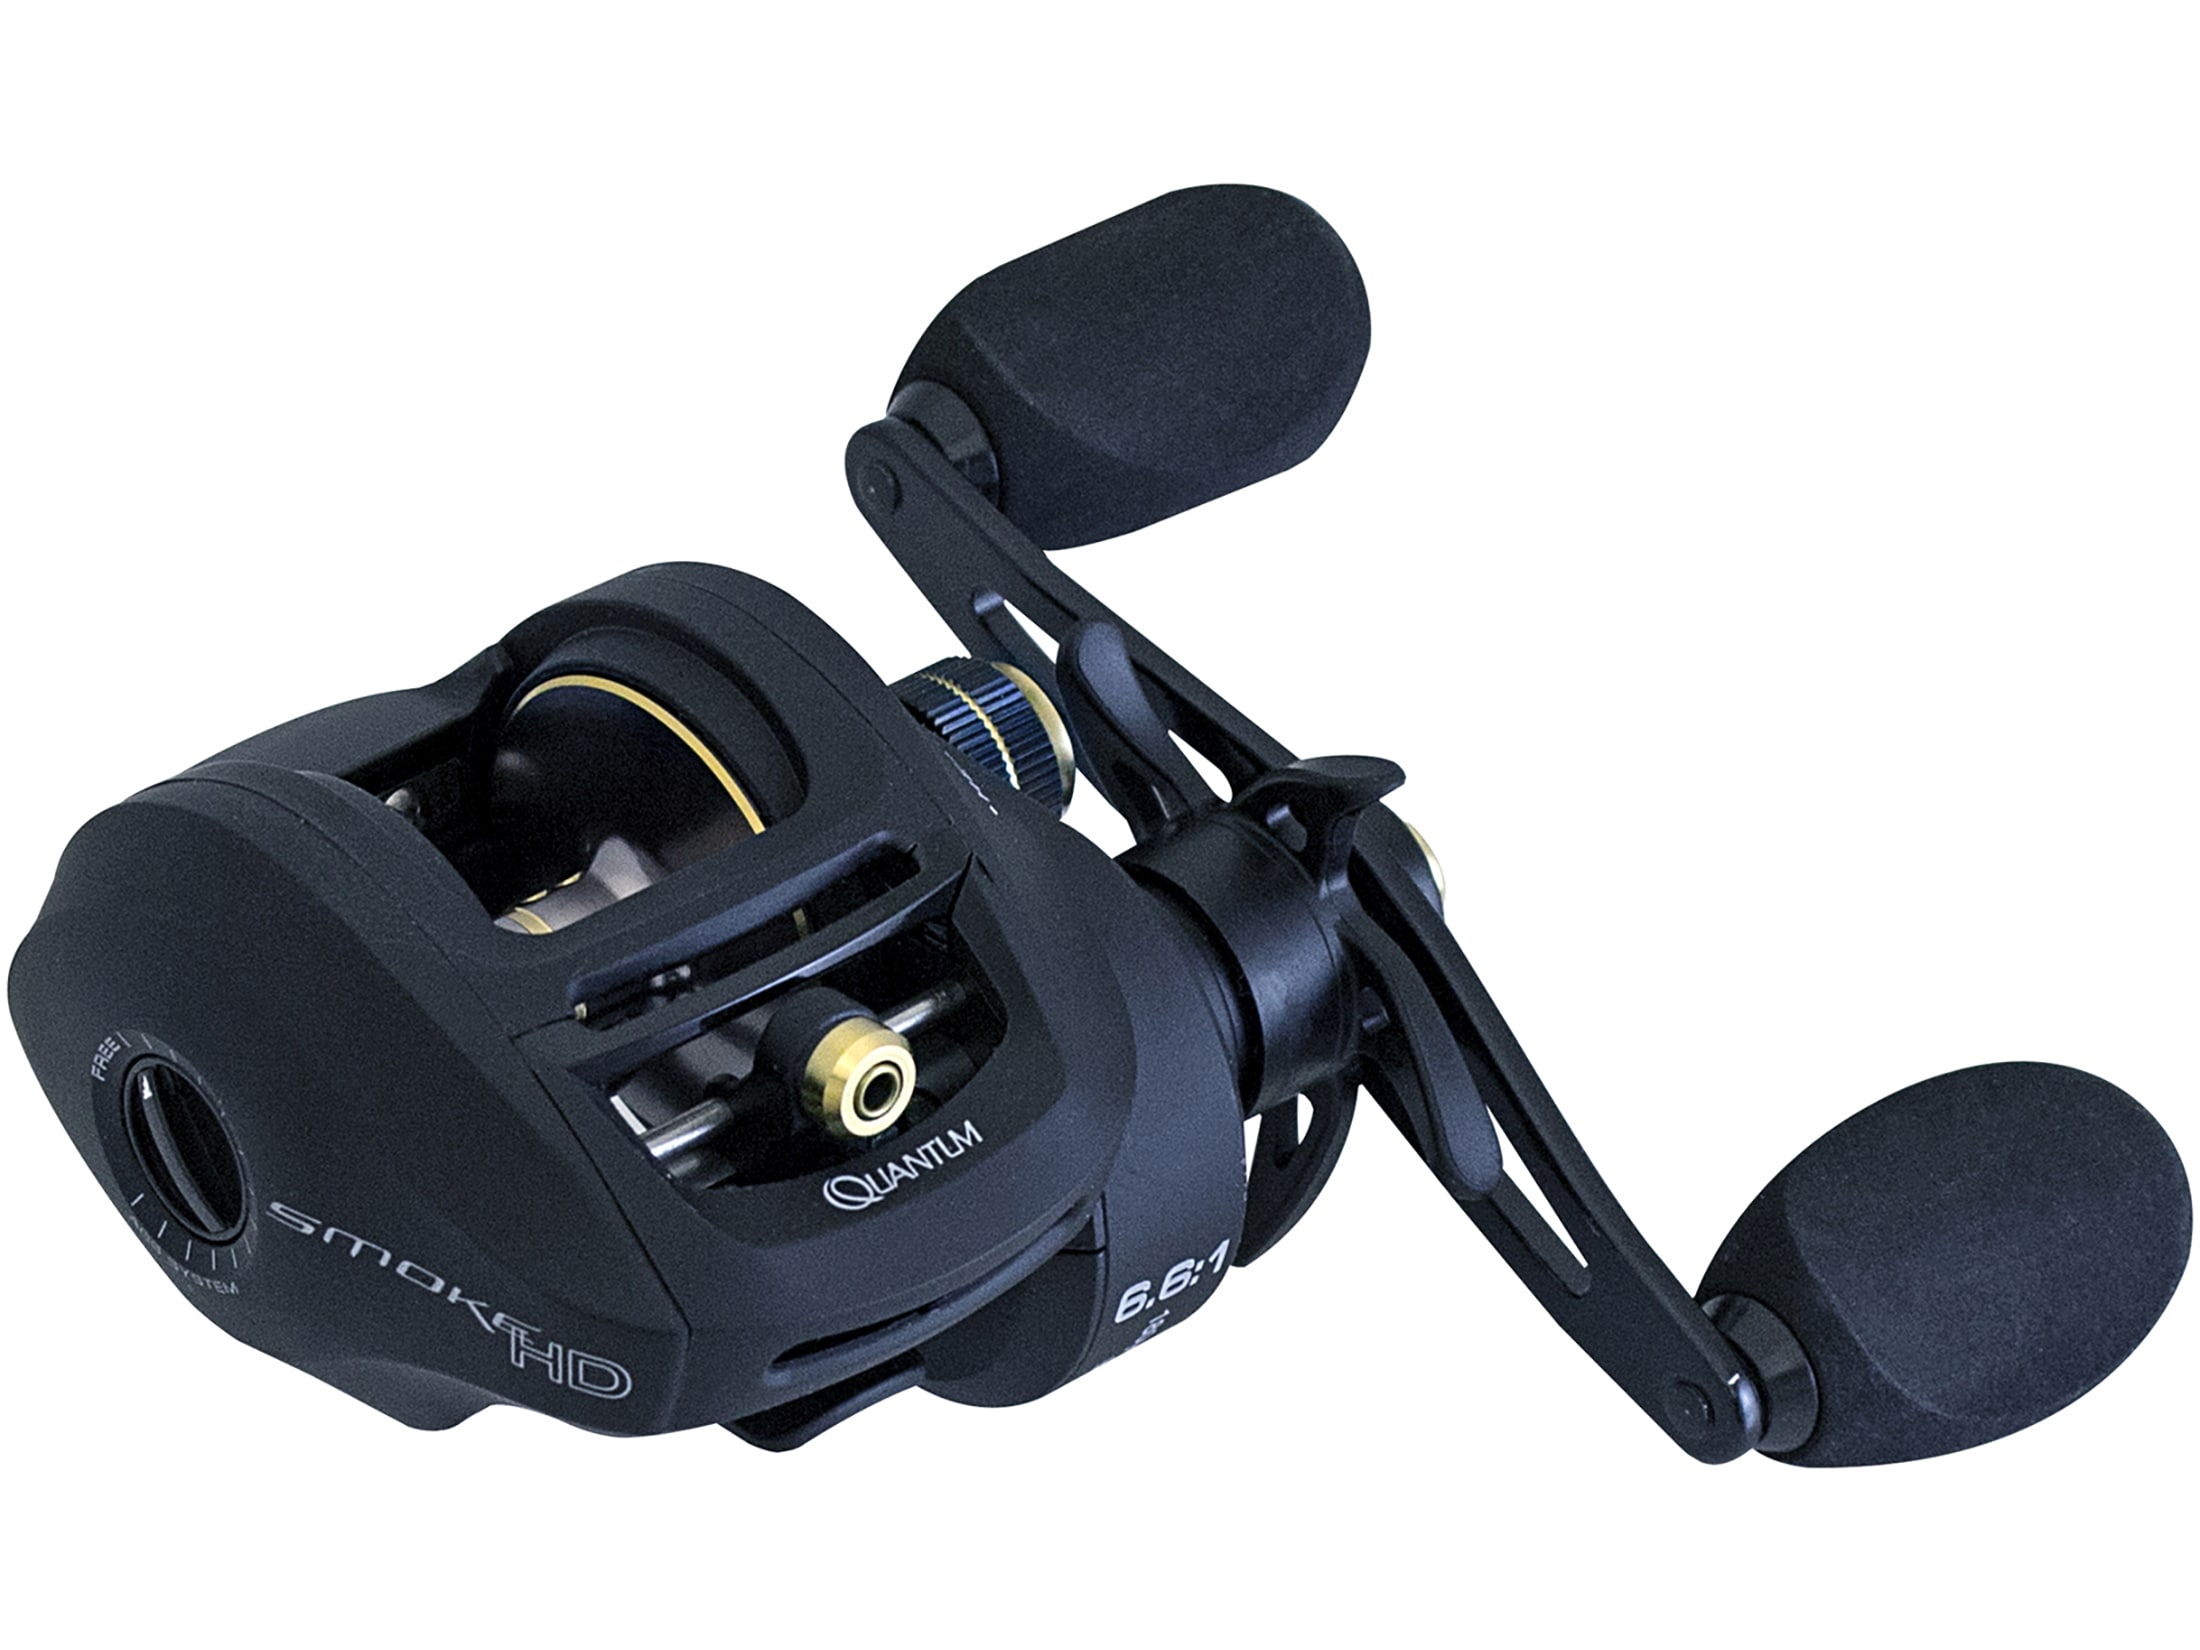 quantum smoke hd 200 casting reels Hot Sale Exclusive Offers,Up To